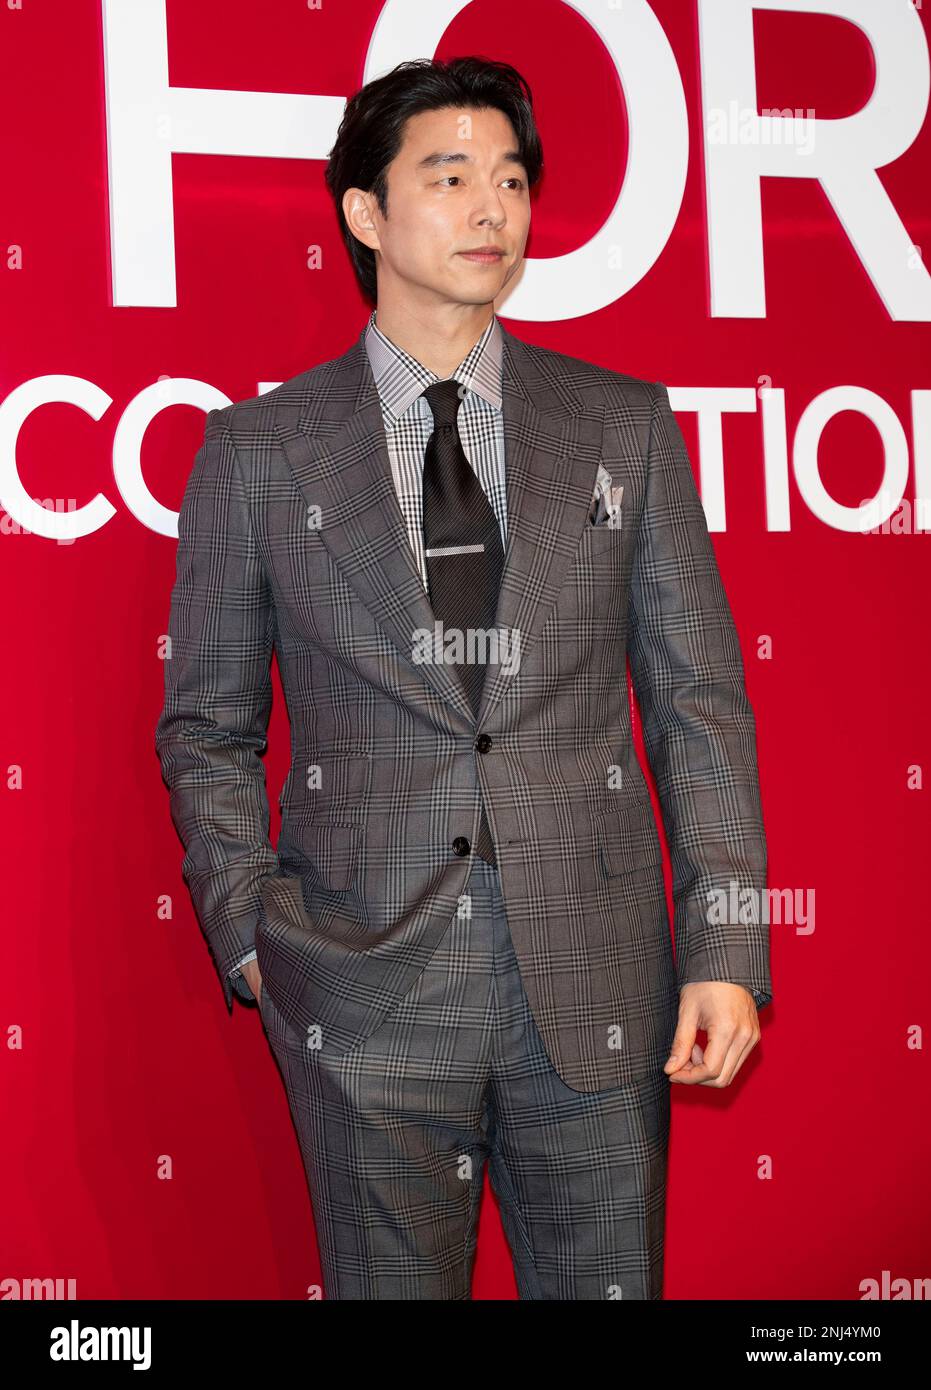 22 February 2023 – Seoul, South Korea: South Korean actor Gong Yoo attends  a photocall for the Tom Ford Beauty opening event in Seoul, South Korea on  February 22, 2023. (Photo by